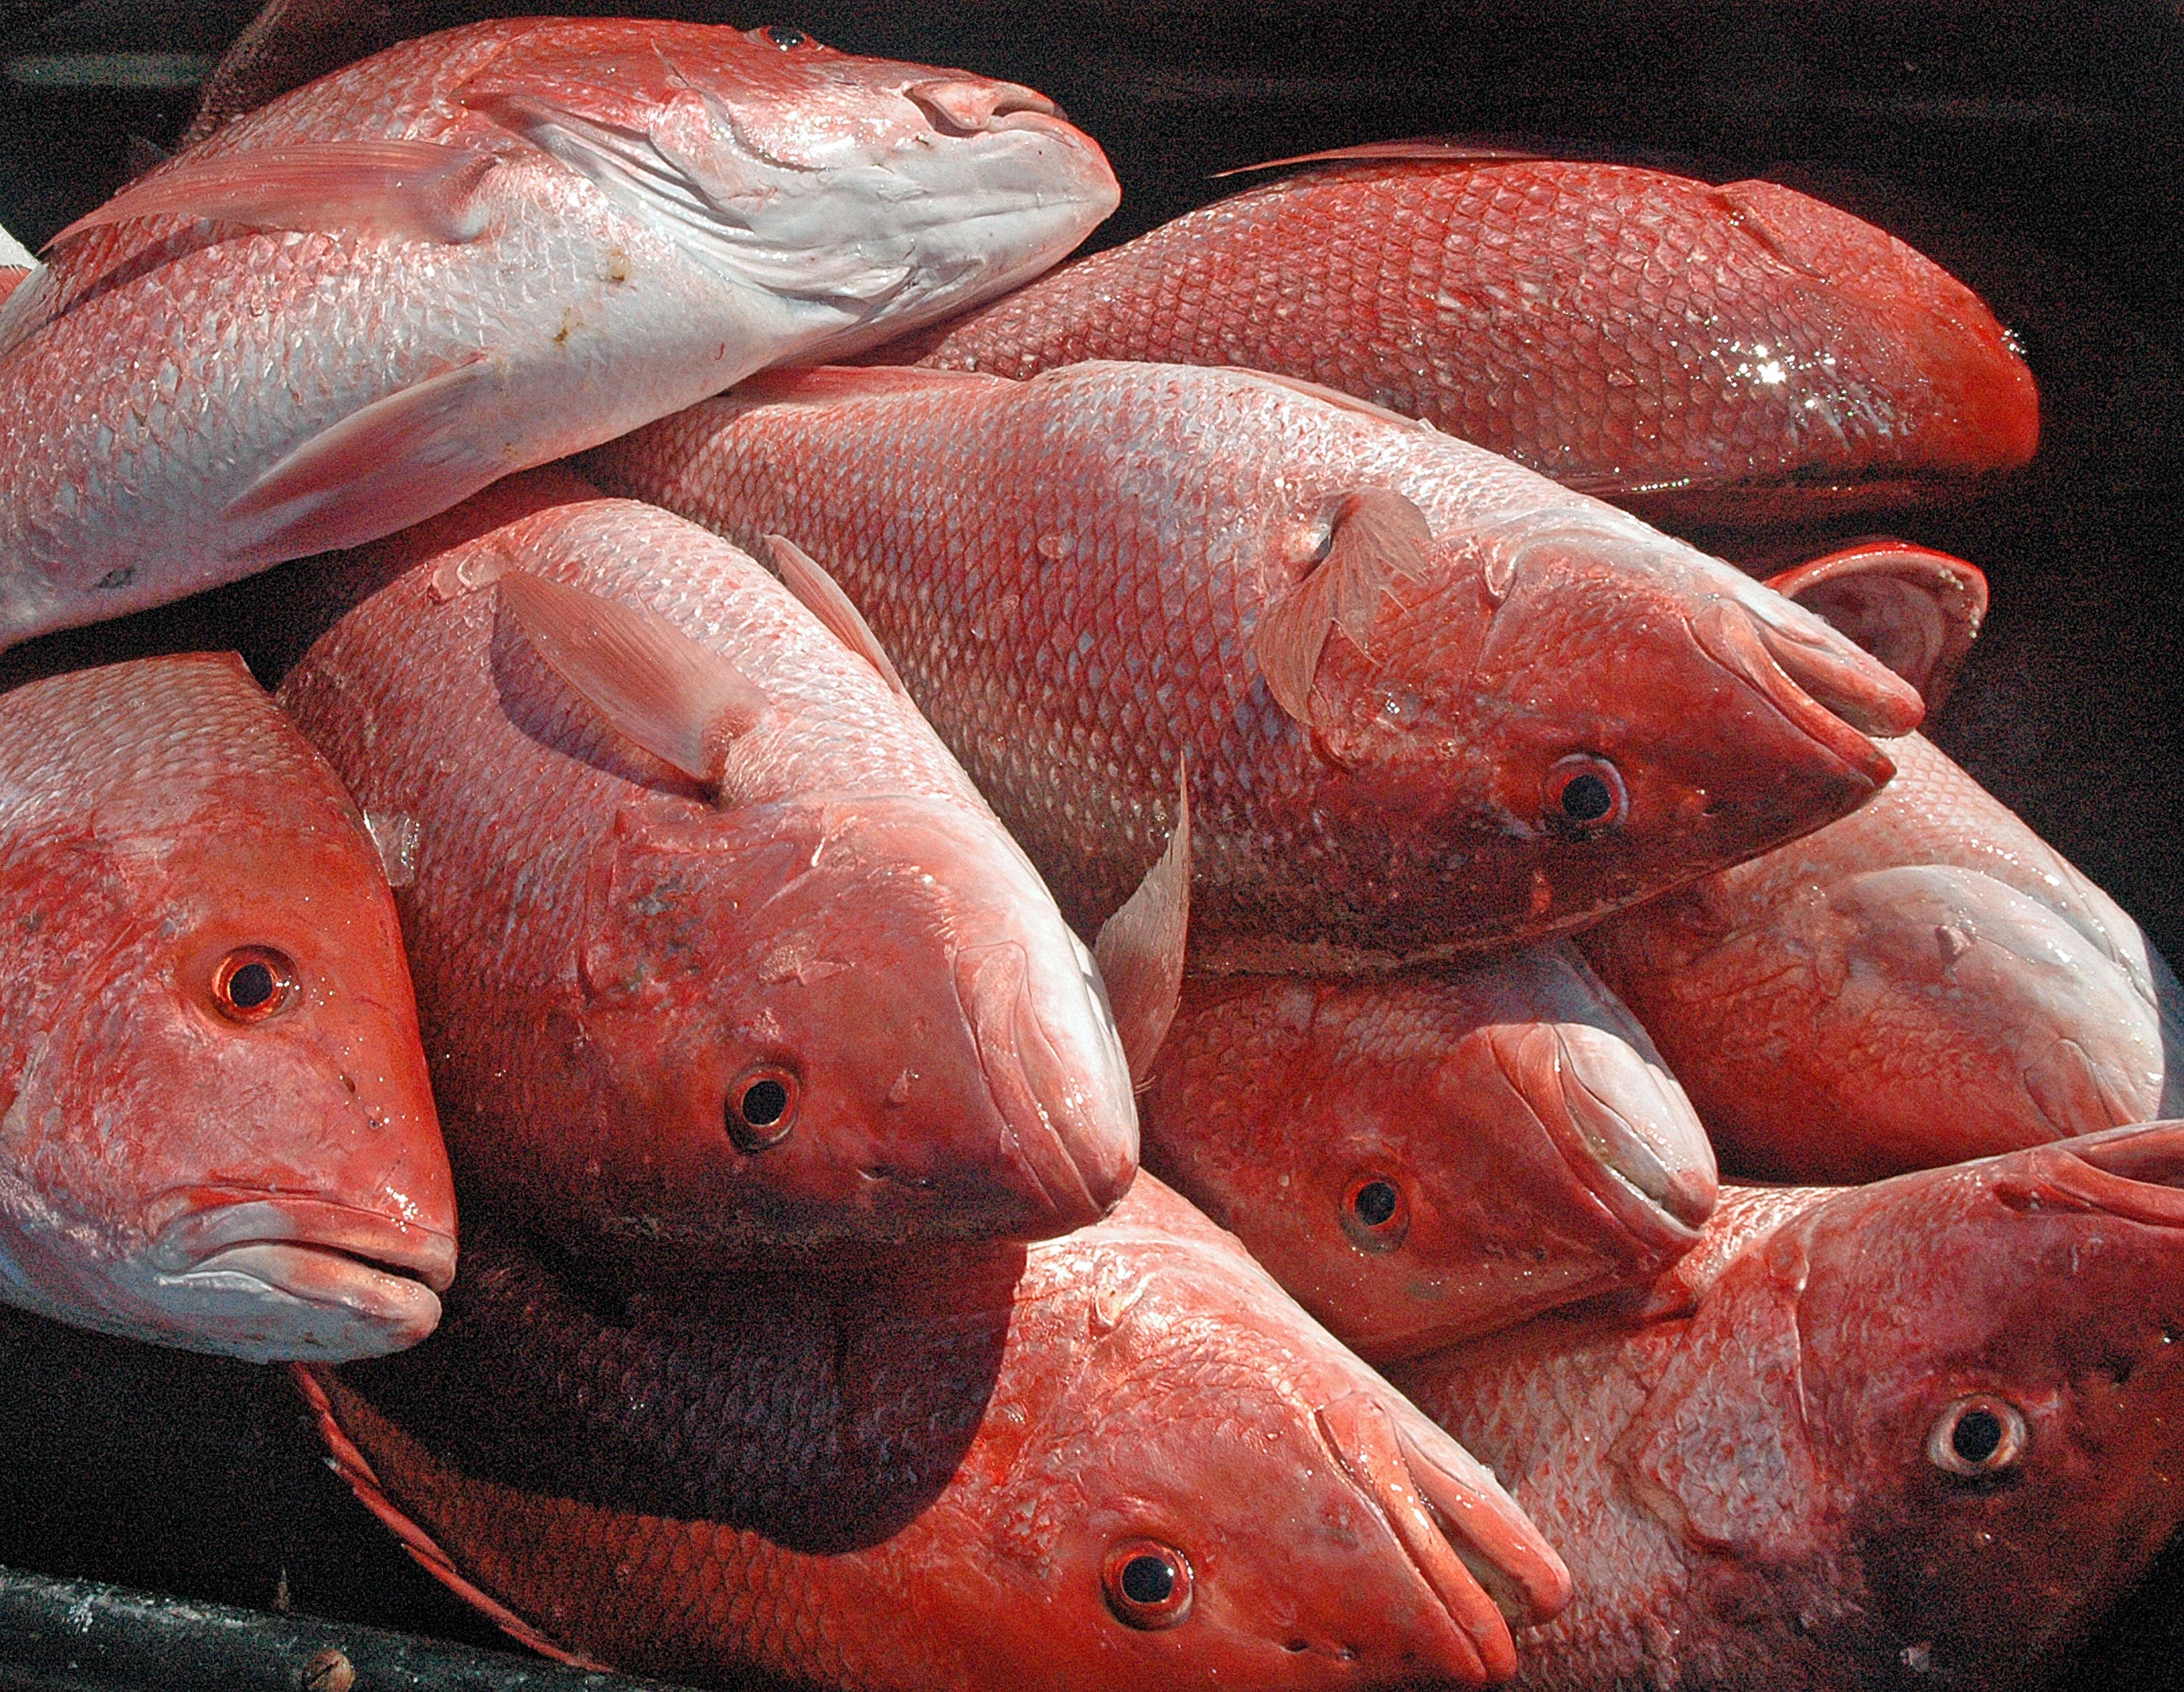 Alabama Announces Closure of Red Snapper Season for Private Anglers